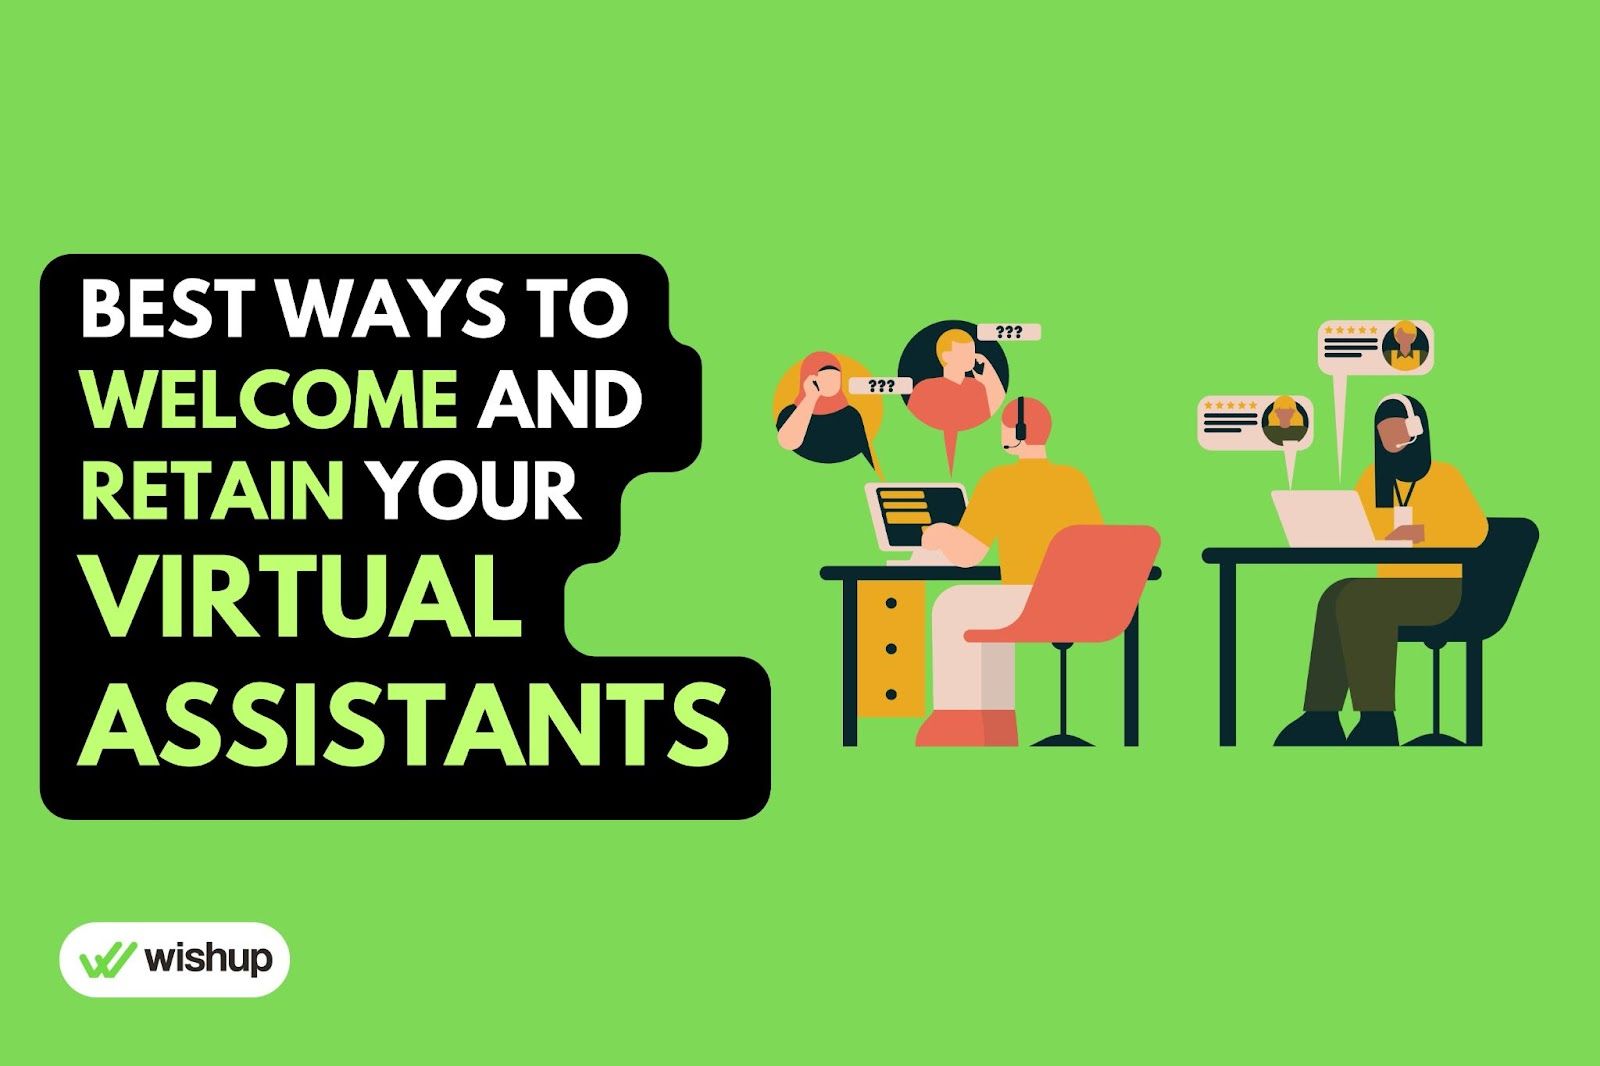 Best Ways to Welcome and Retain Your Virtual Assistants